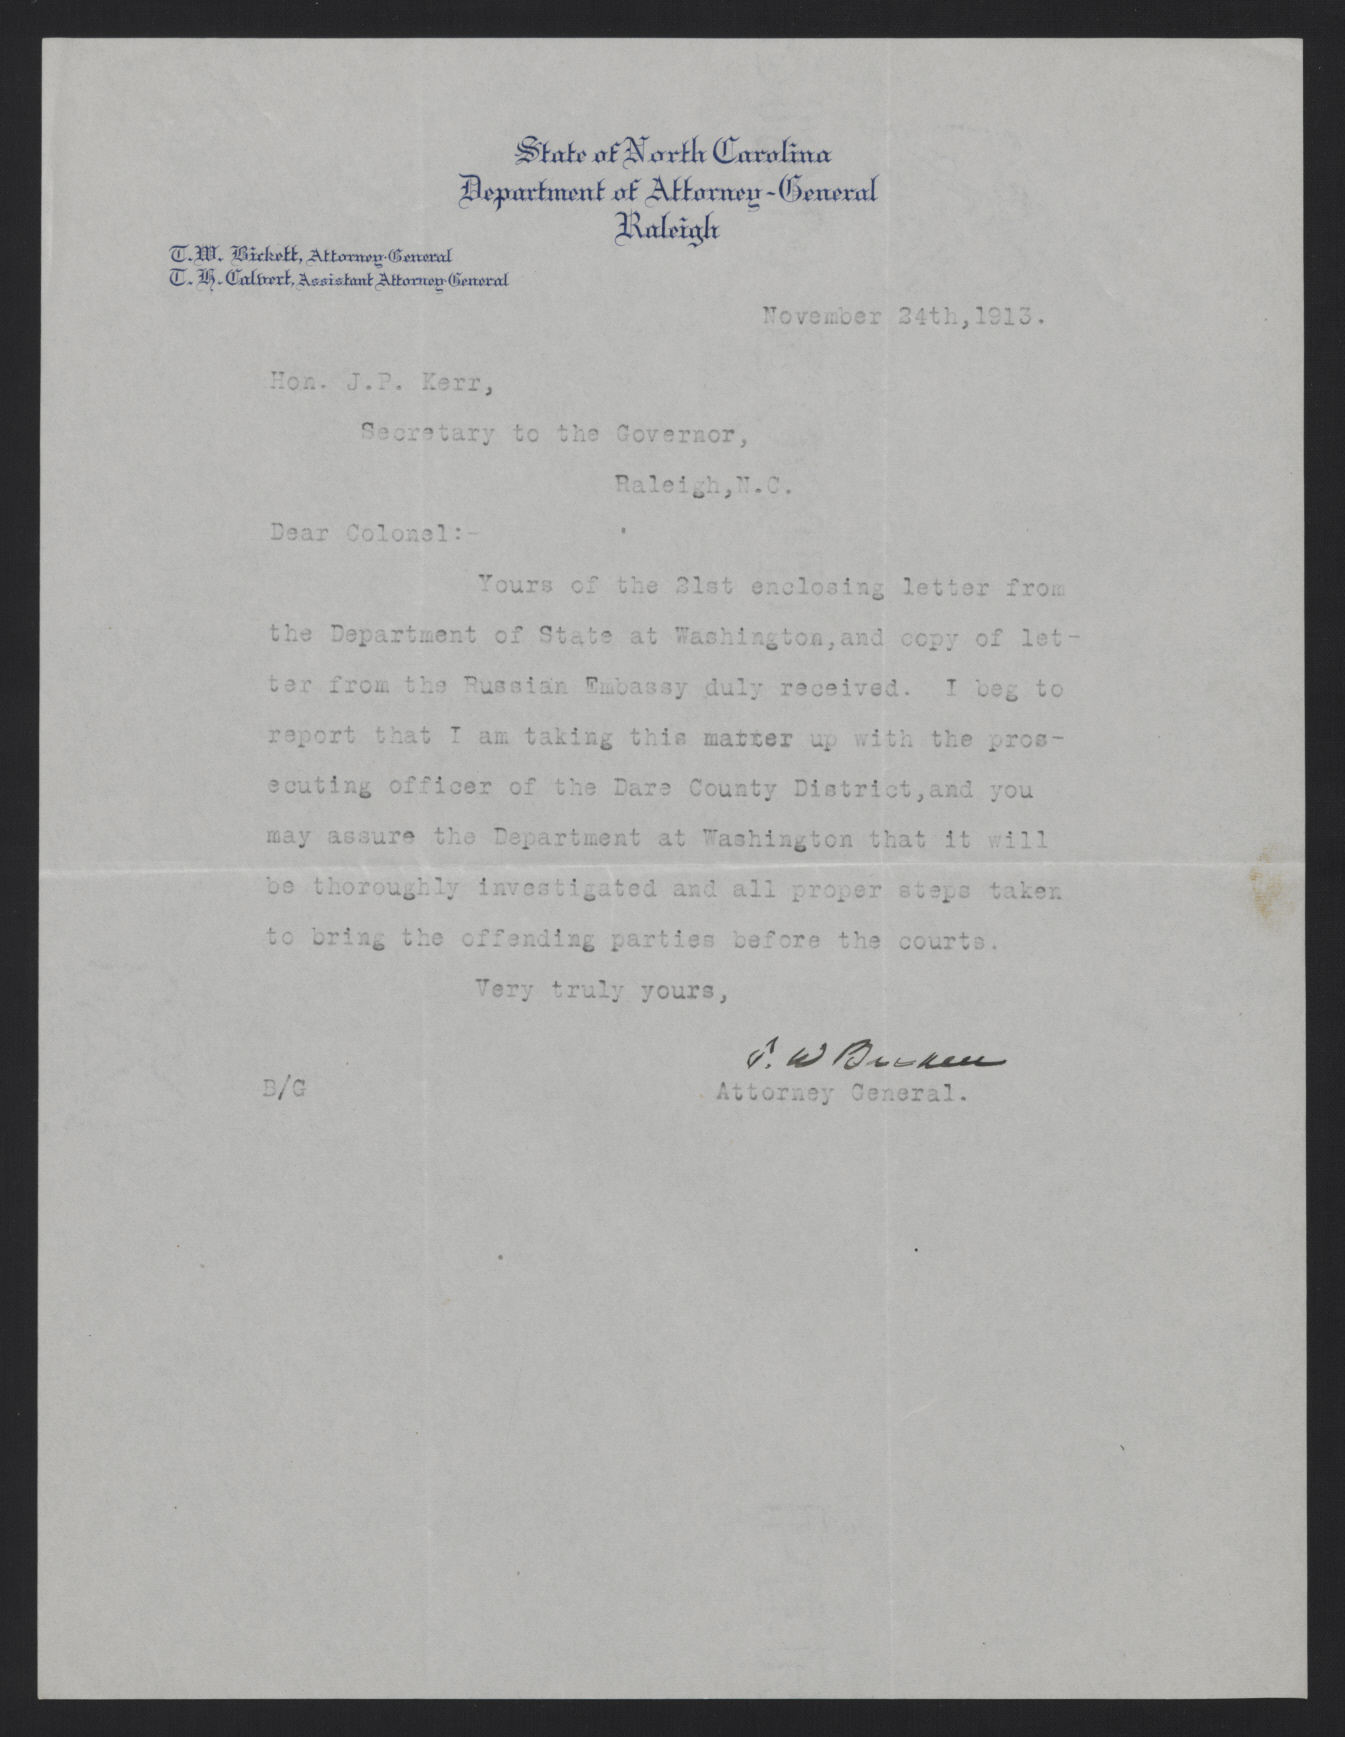 Letter from Bickett to Kerr, November 24, 1913